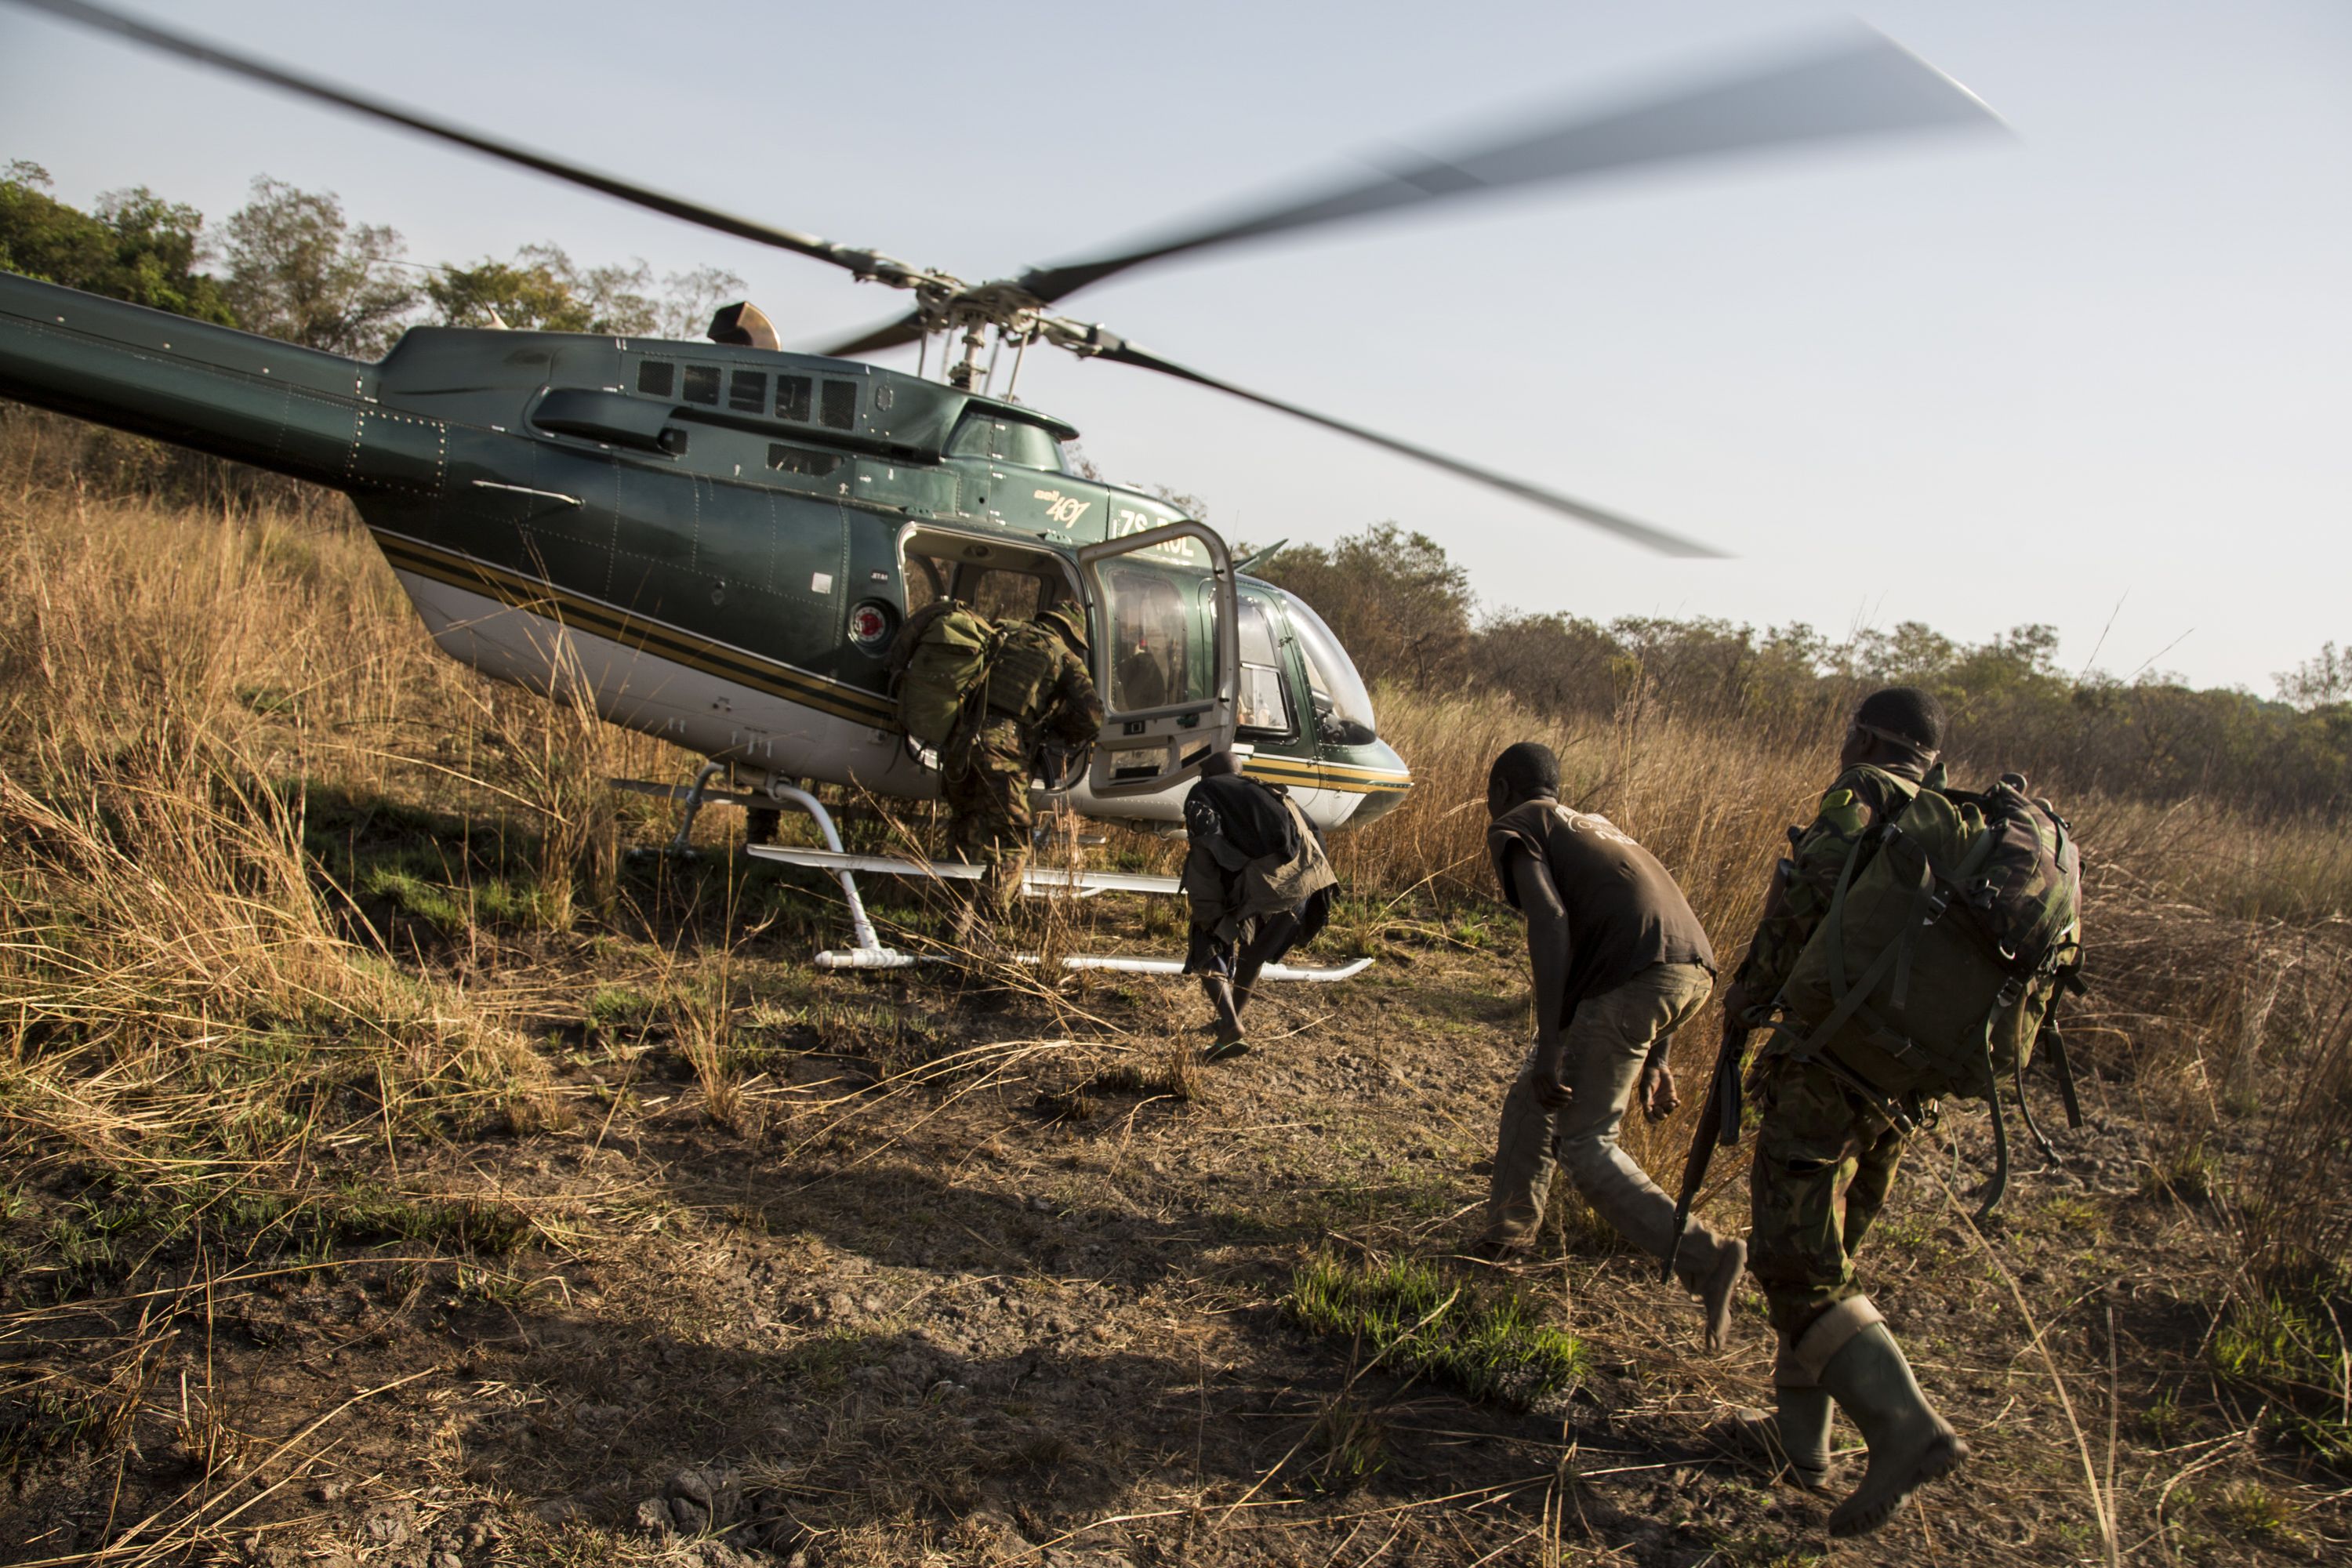 Rangers escort two poachers onto a helicopter after catching them hunting game in the Chinko wildlife reserve. Image by Jack Losh. Central African Republic, 2018.